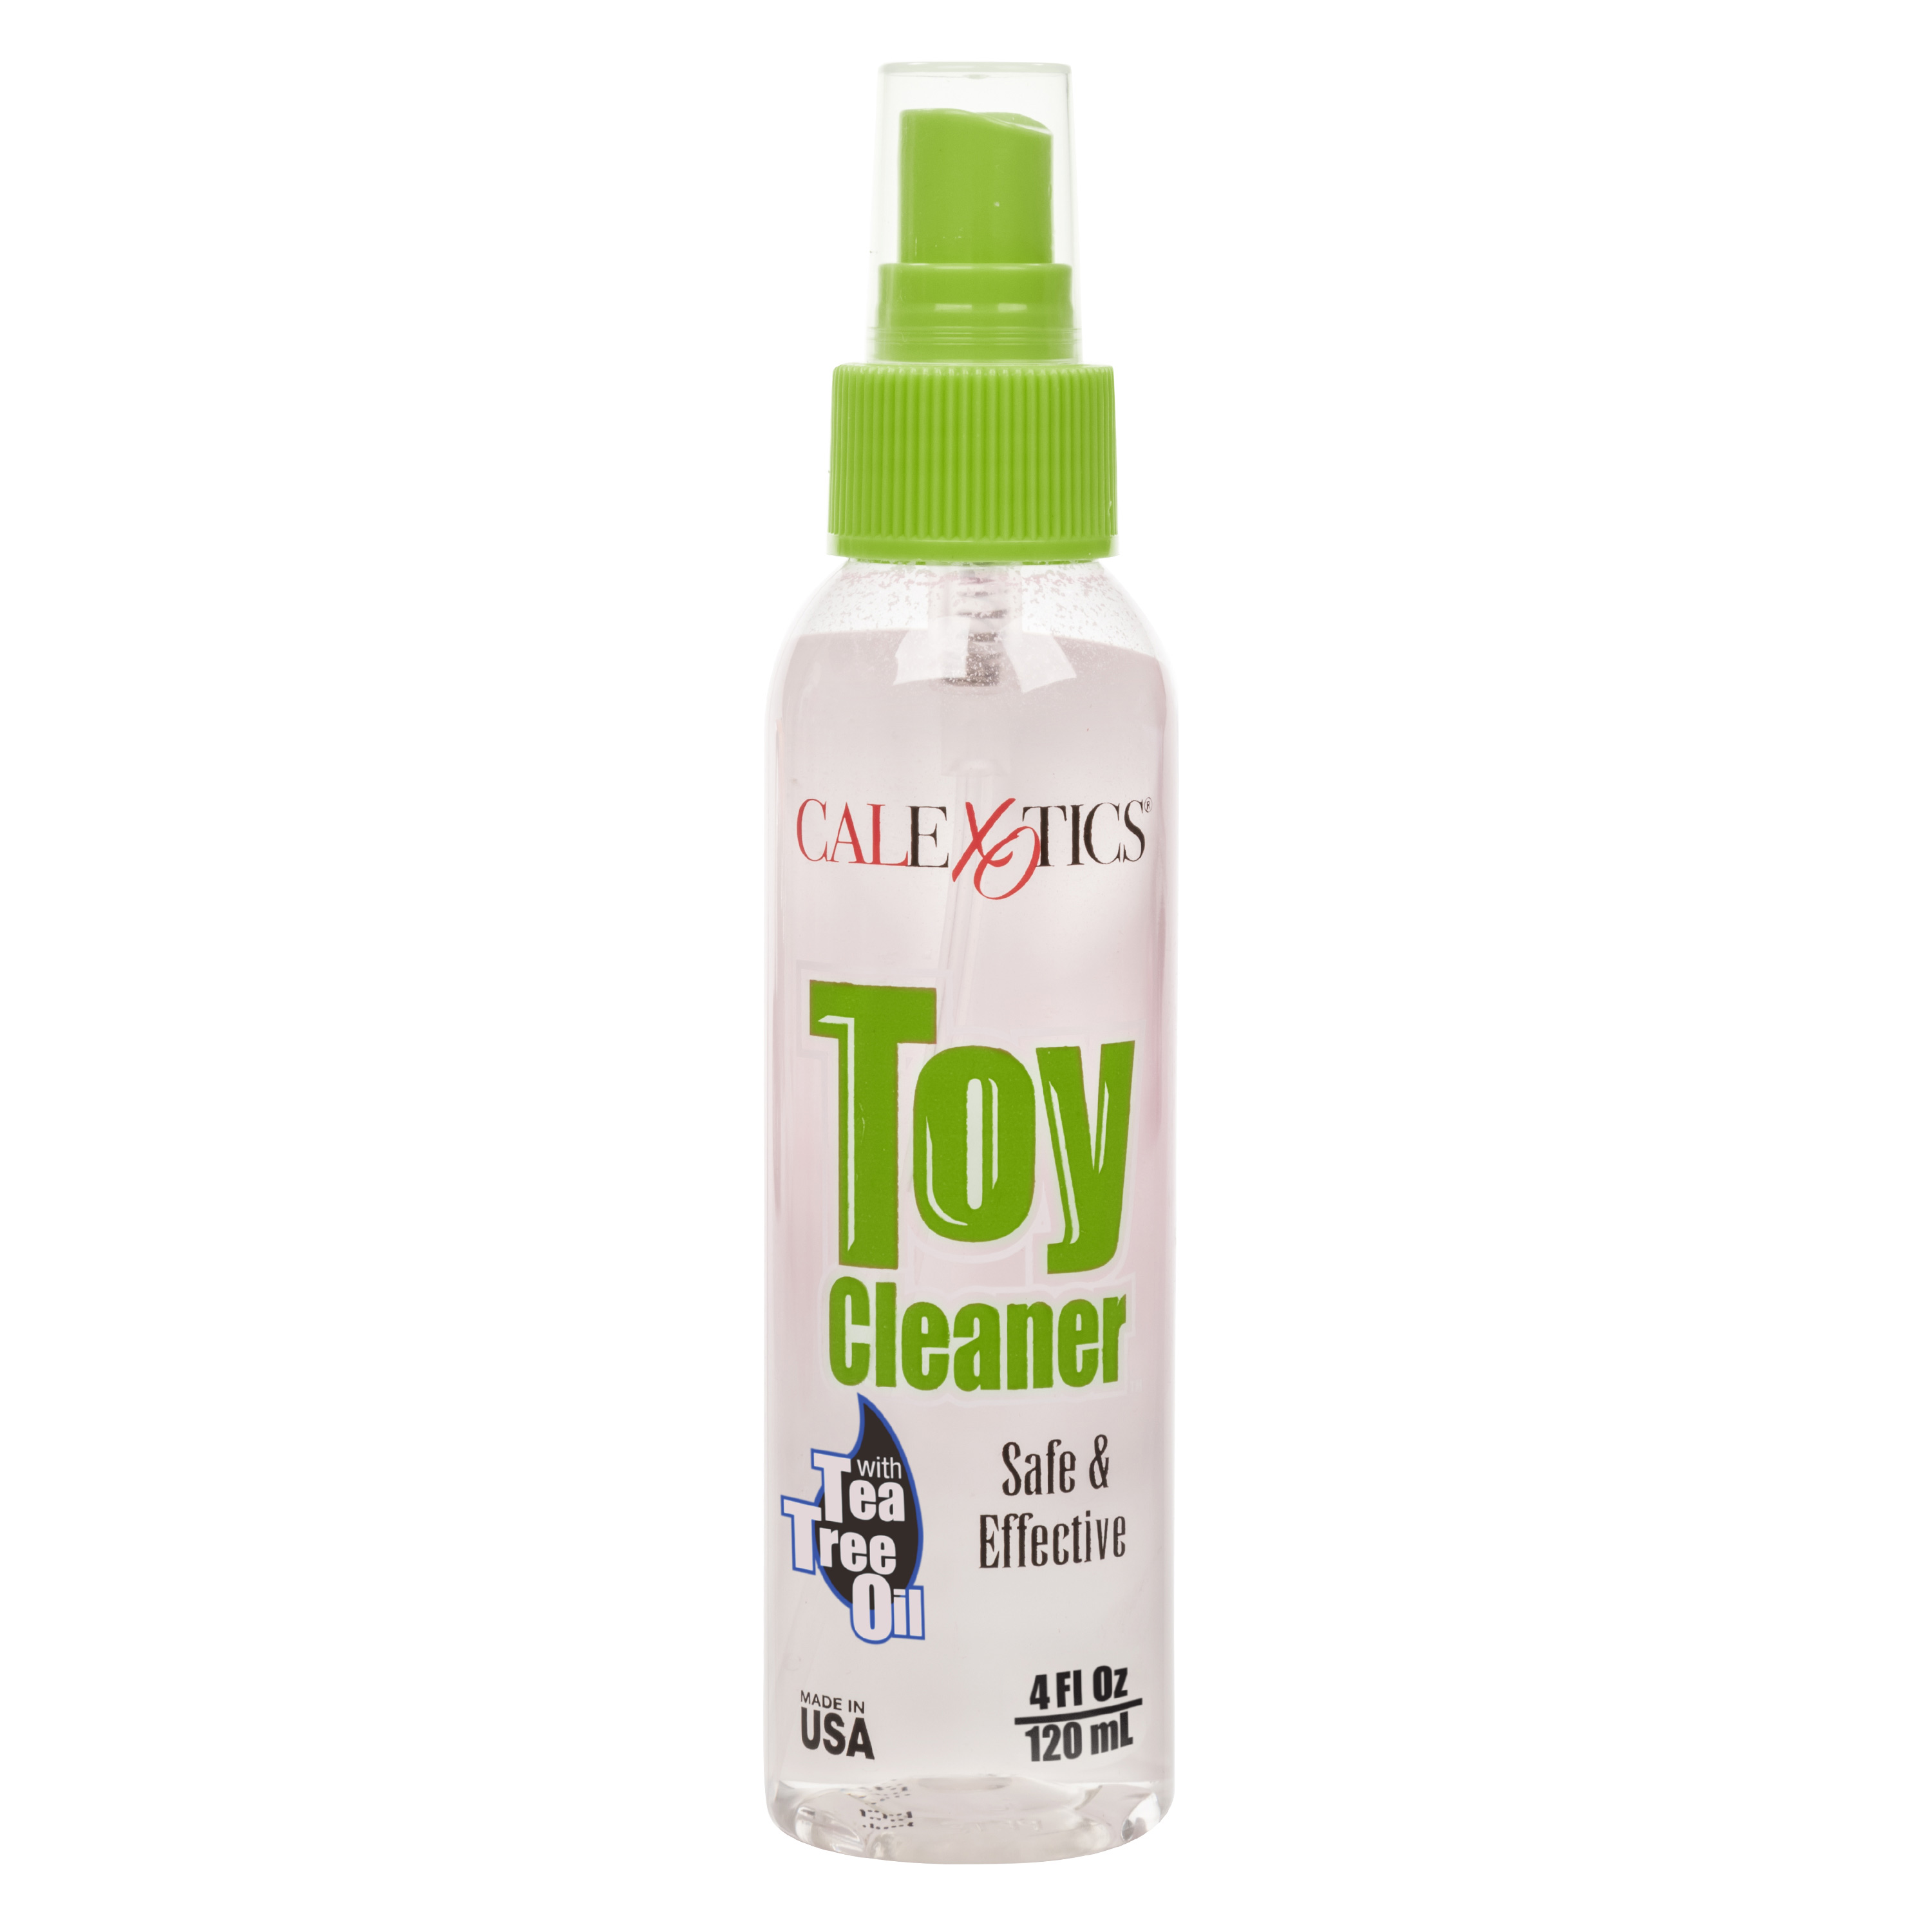 toy cleaner with tea tree oil  fl. oz. 